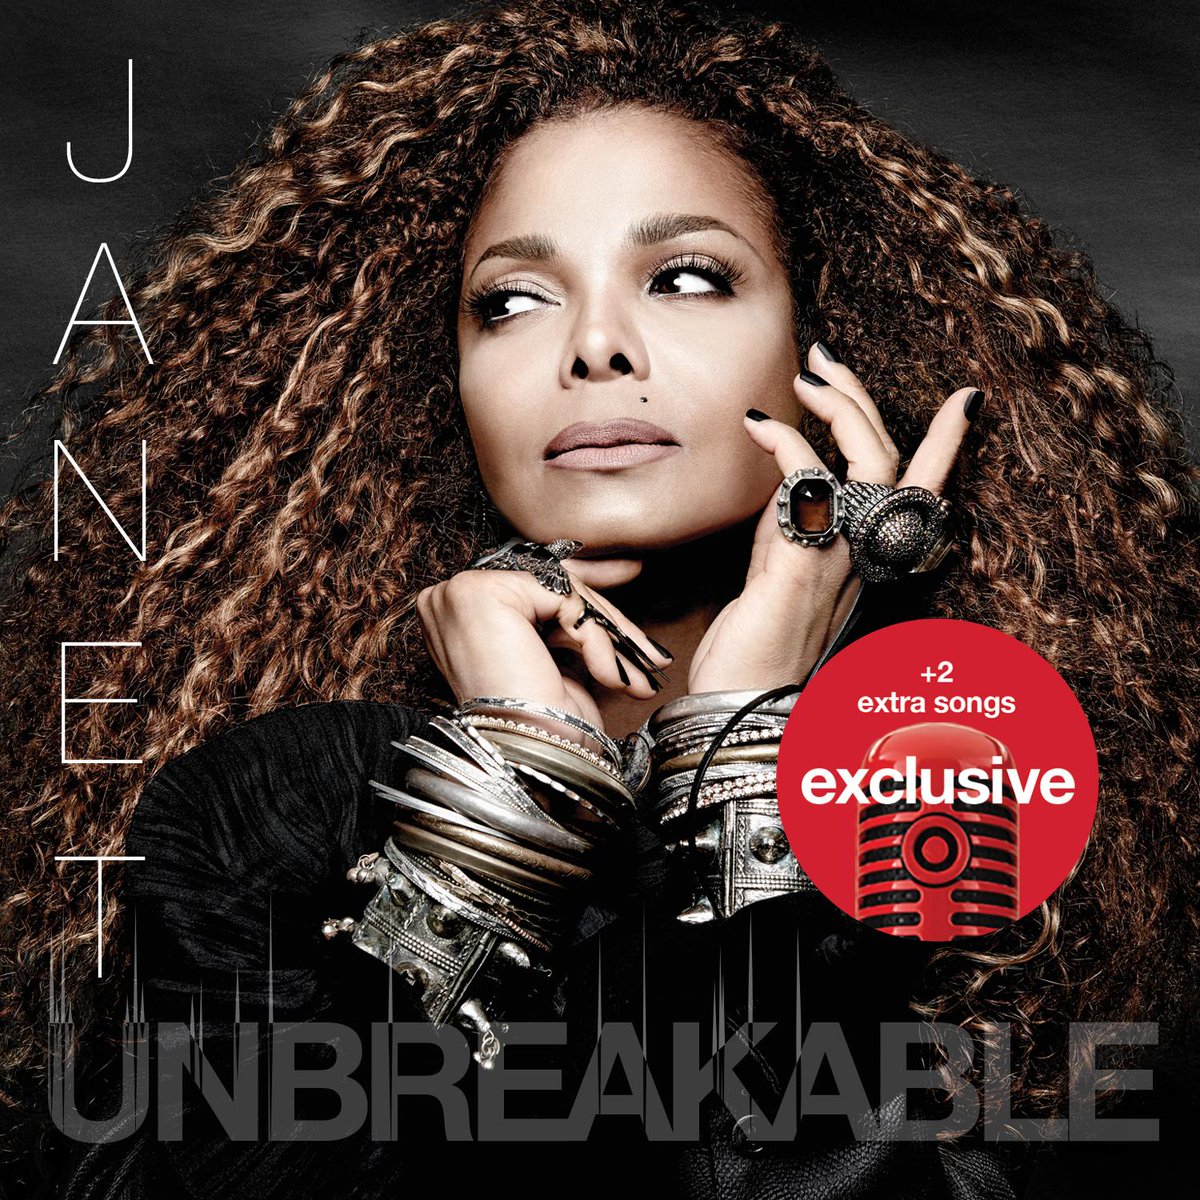 #UNBREAKABLE is finally out today! 
Pick it up at @Target with 2 exclusive tracks. -Janet’s Team http://t.co/g32d0ISm2o